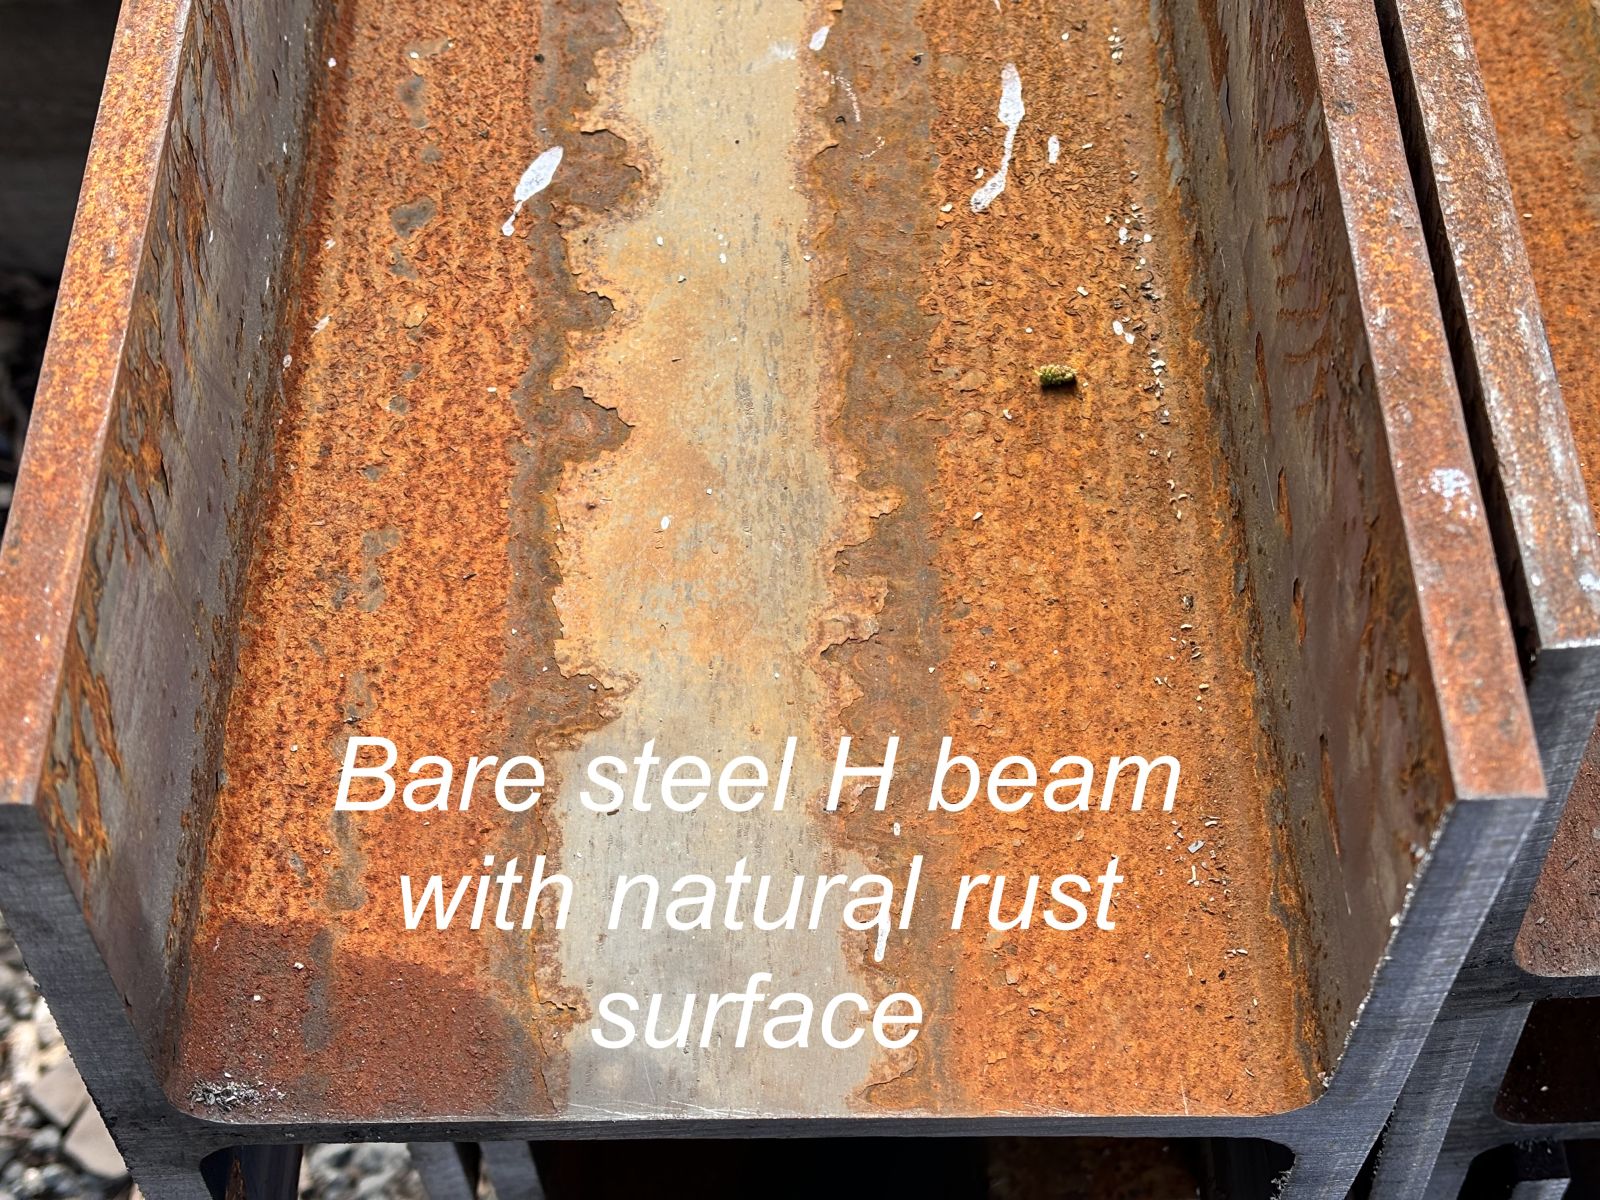 Bare steel H beam to use with railway sleepers that will naturally develop a rusty red surface. Railwaysleepers.com